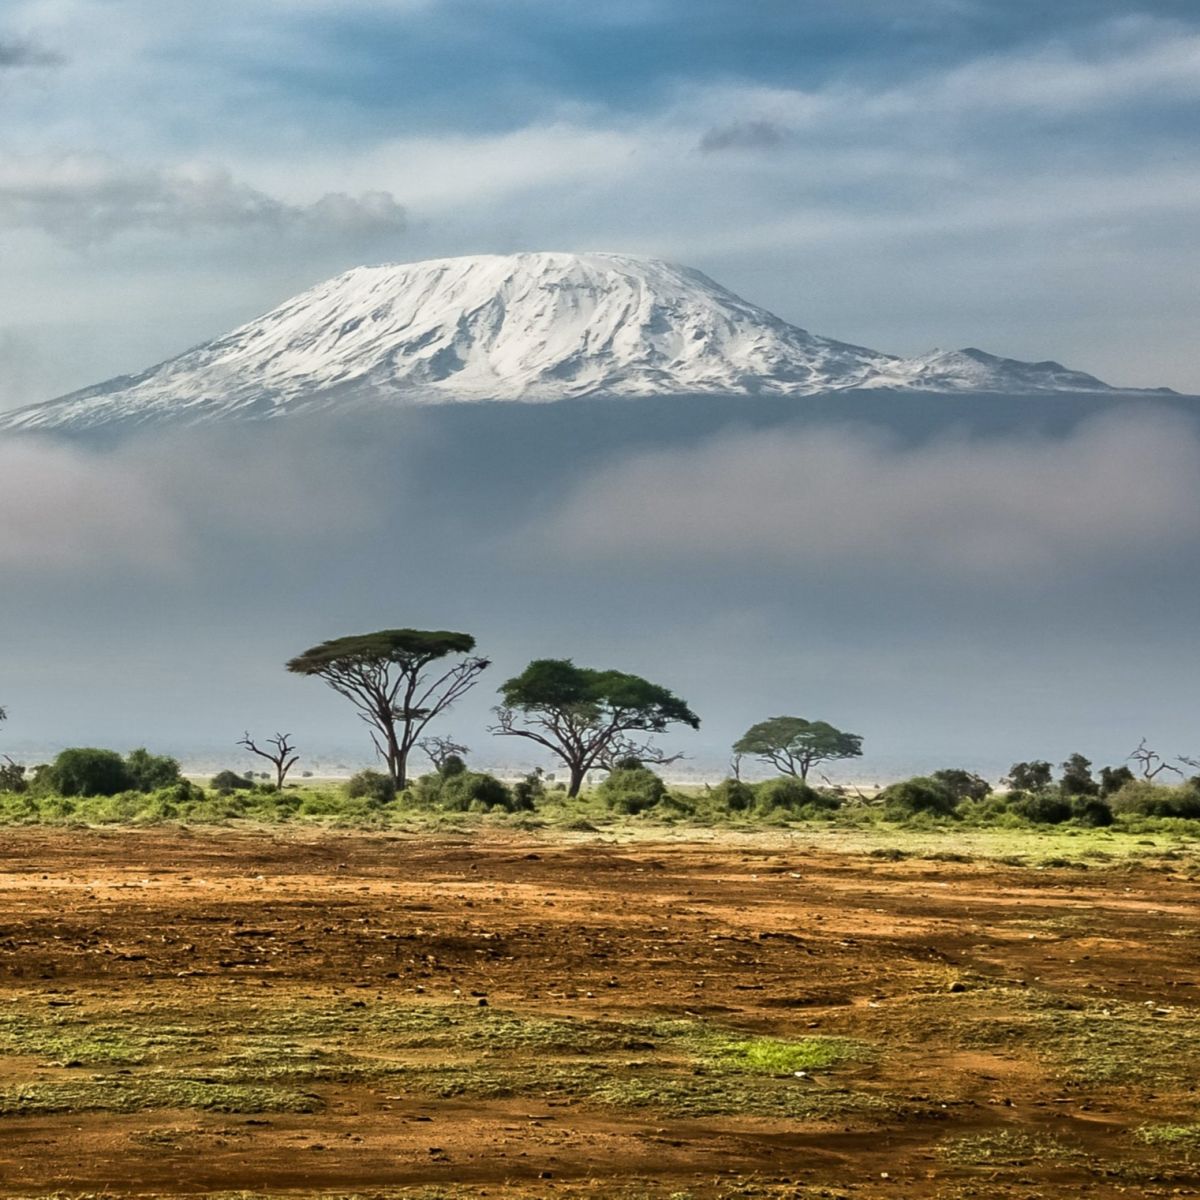 Mt Kilimanjaro with lots of snow seen from a distance with subtropical landscape in foreground and clouds obscuring lower half of mountain